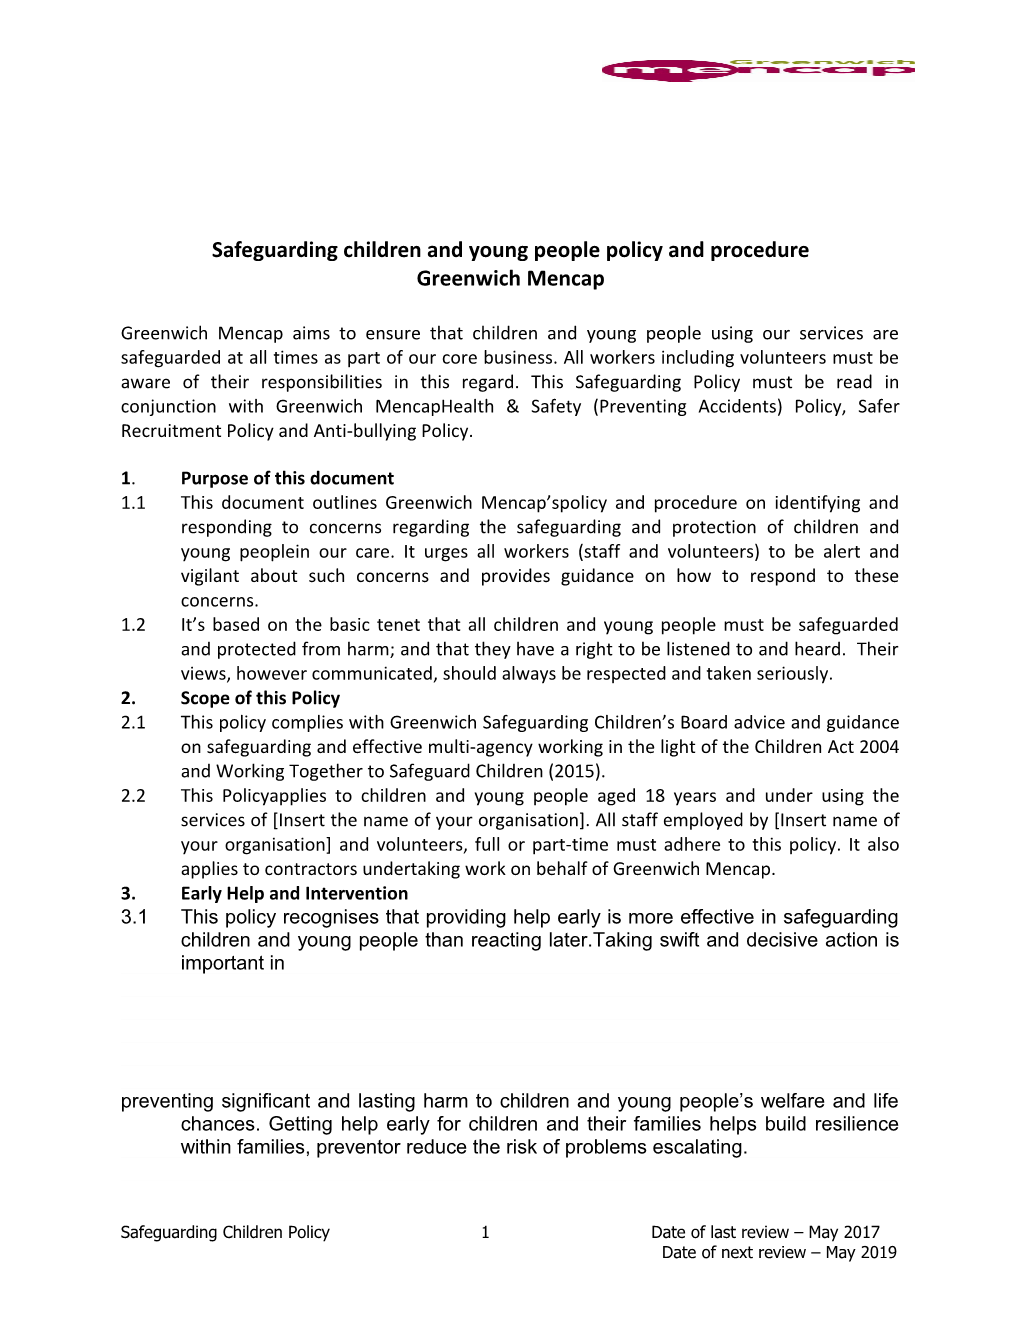 Safeguarding Children and Young People Policy and Procedure